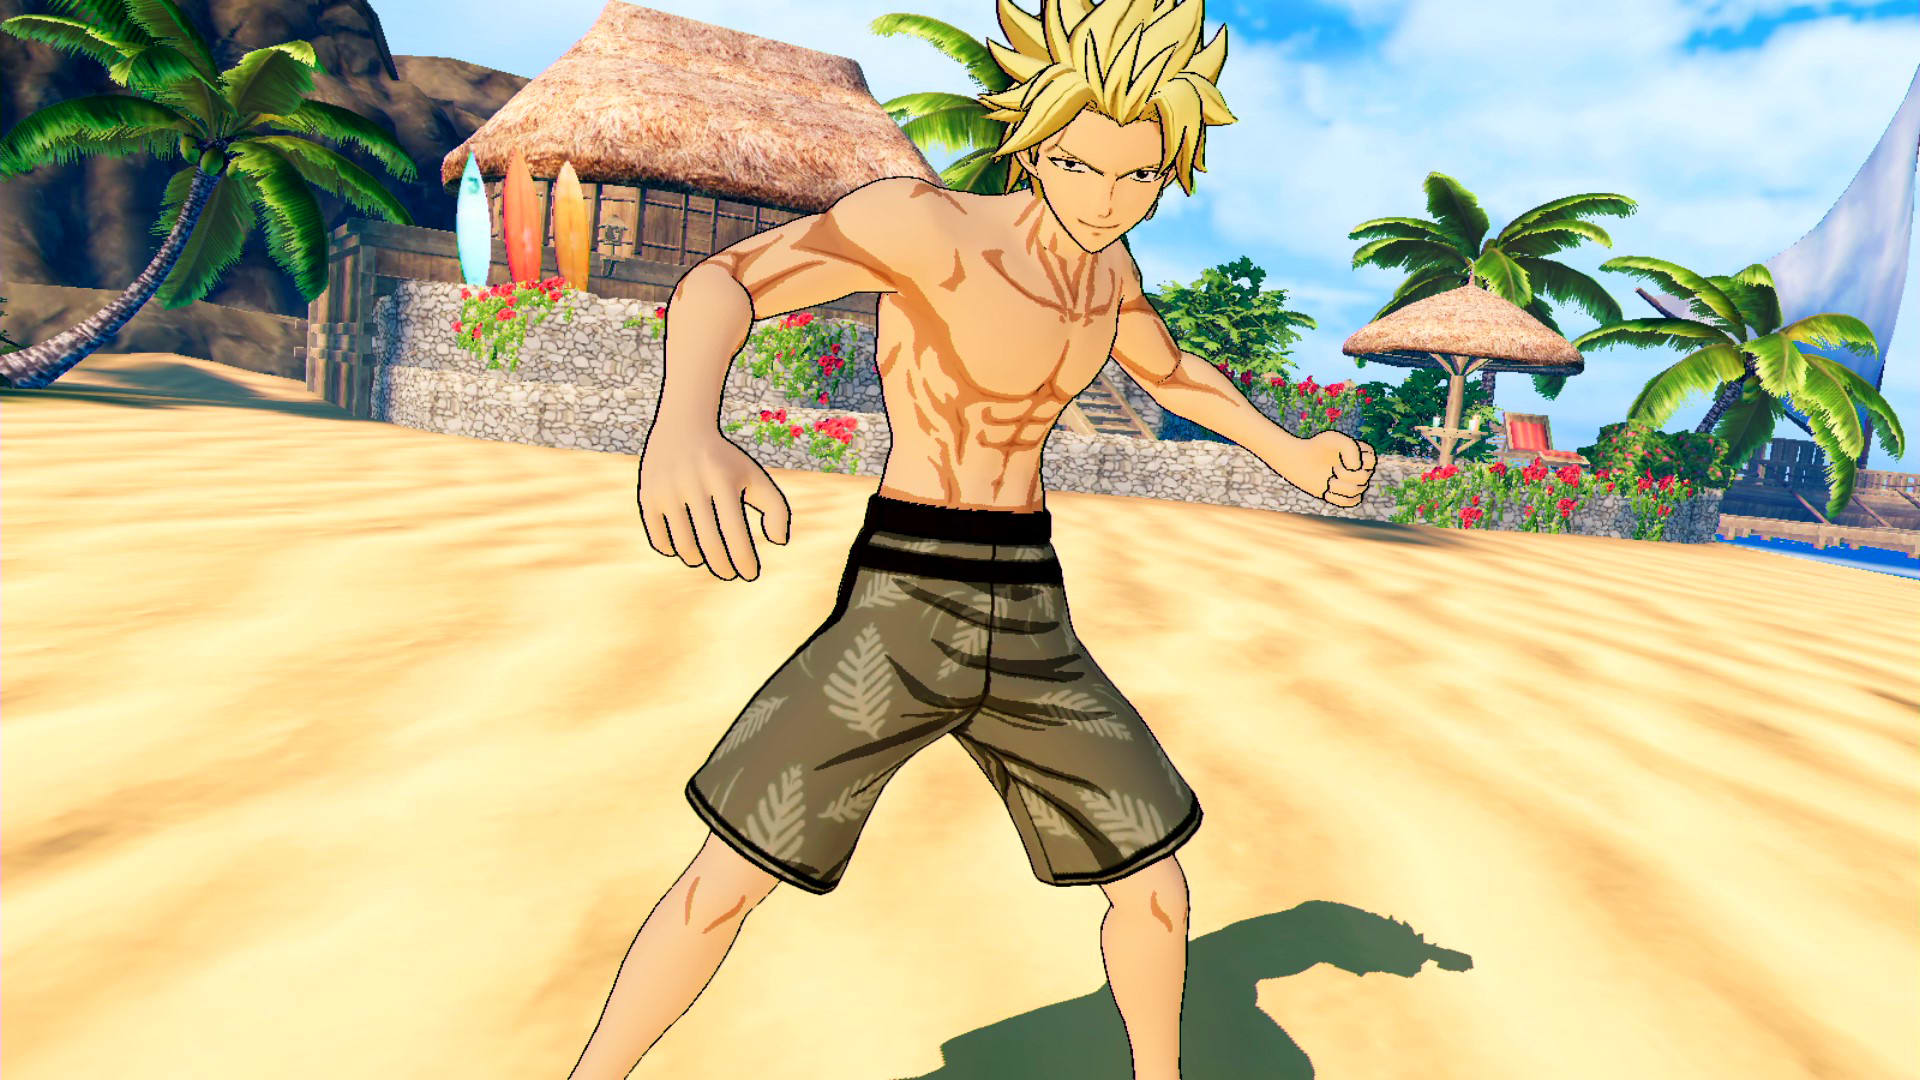 Sting's Costume "Special Swimsuit"